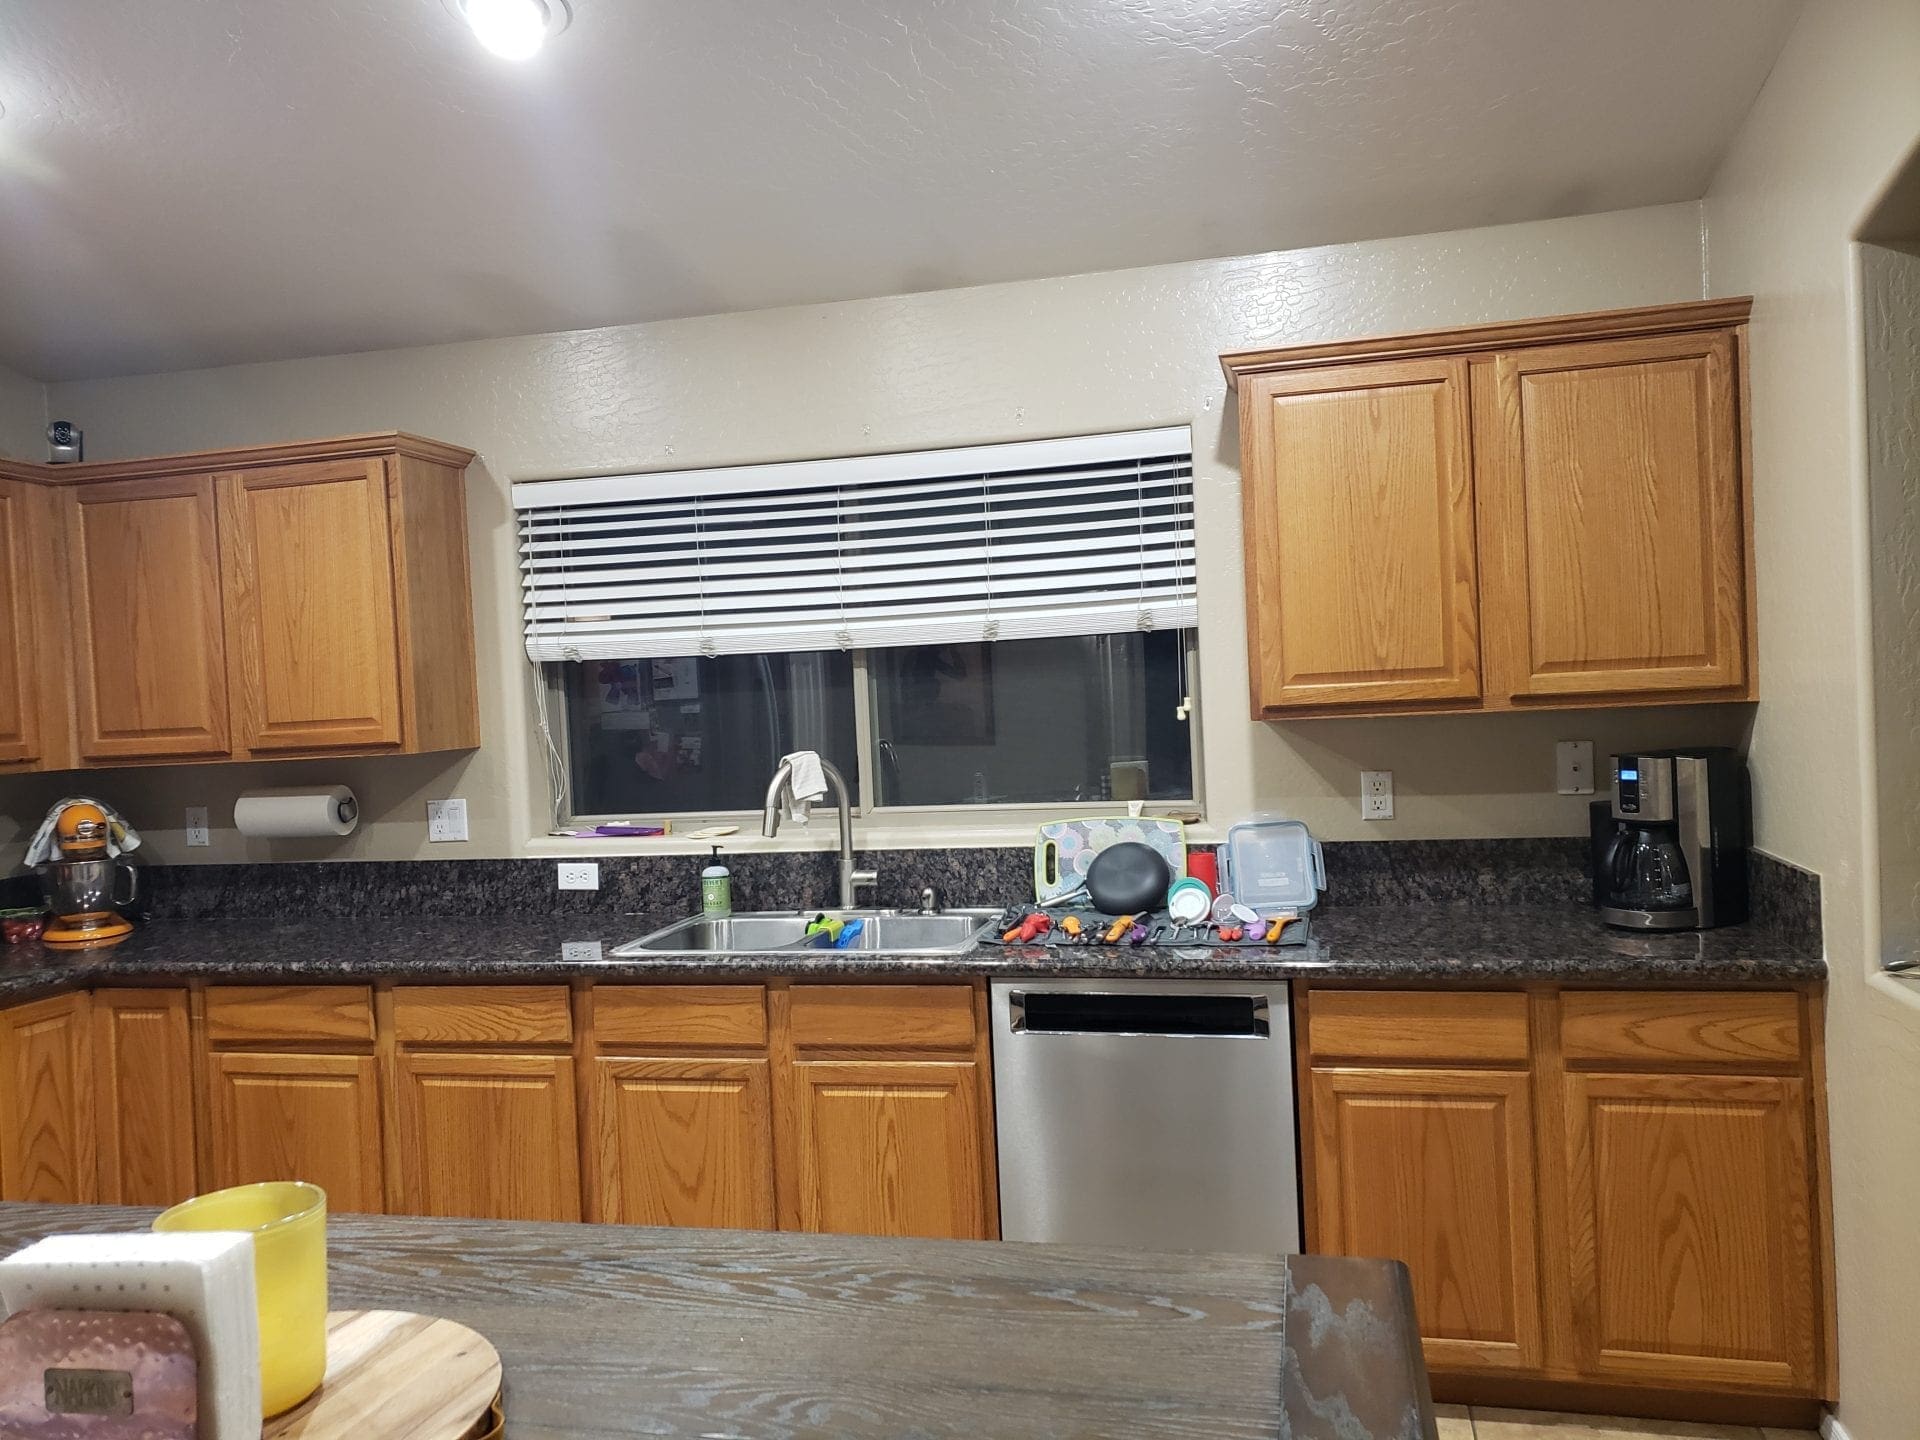 Arizona Painting Company offers Cabinet Painting: Newly painted cabinets bring a fresh and stylish transformation to any space. Old brown kitchen cabinets before being painted and transformed.